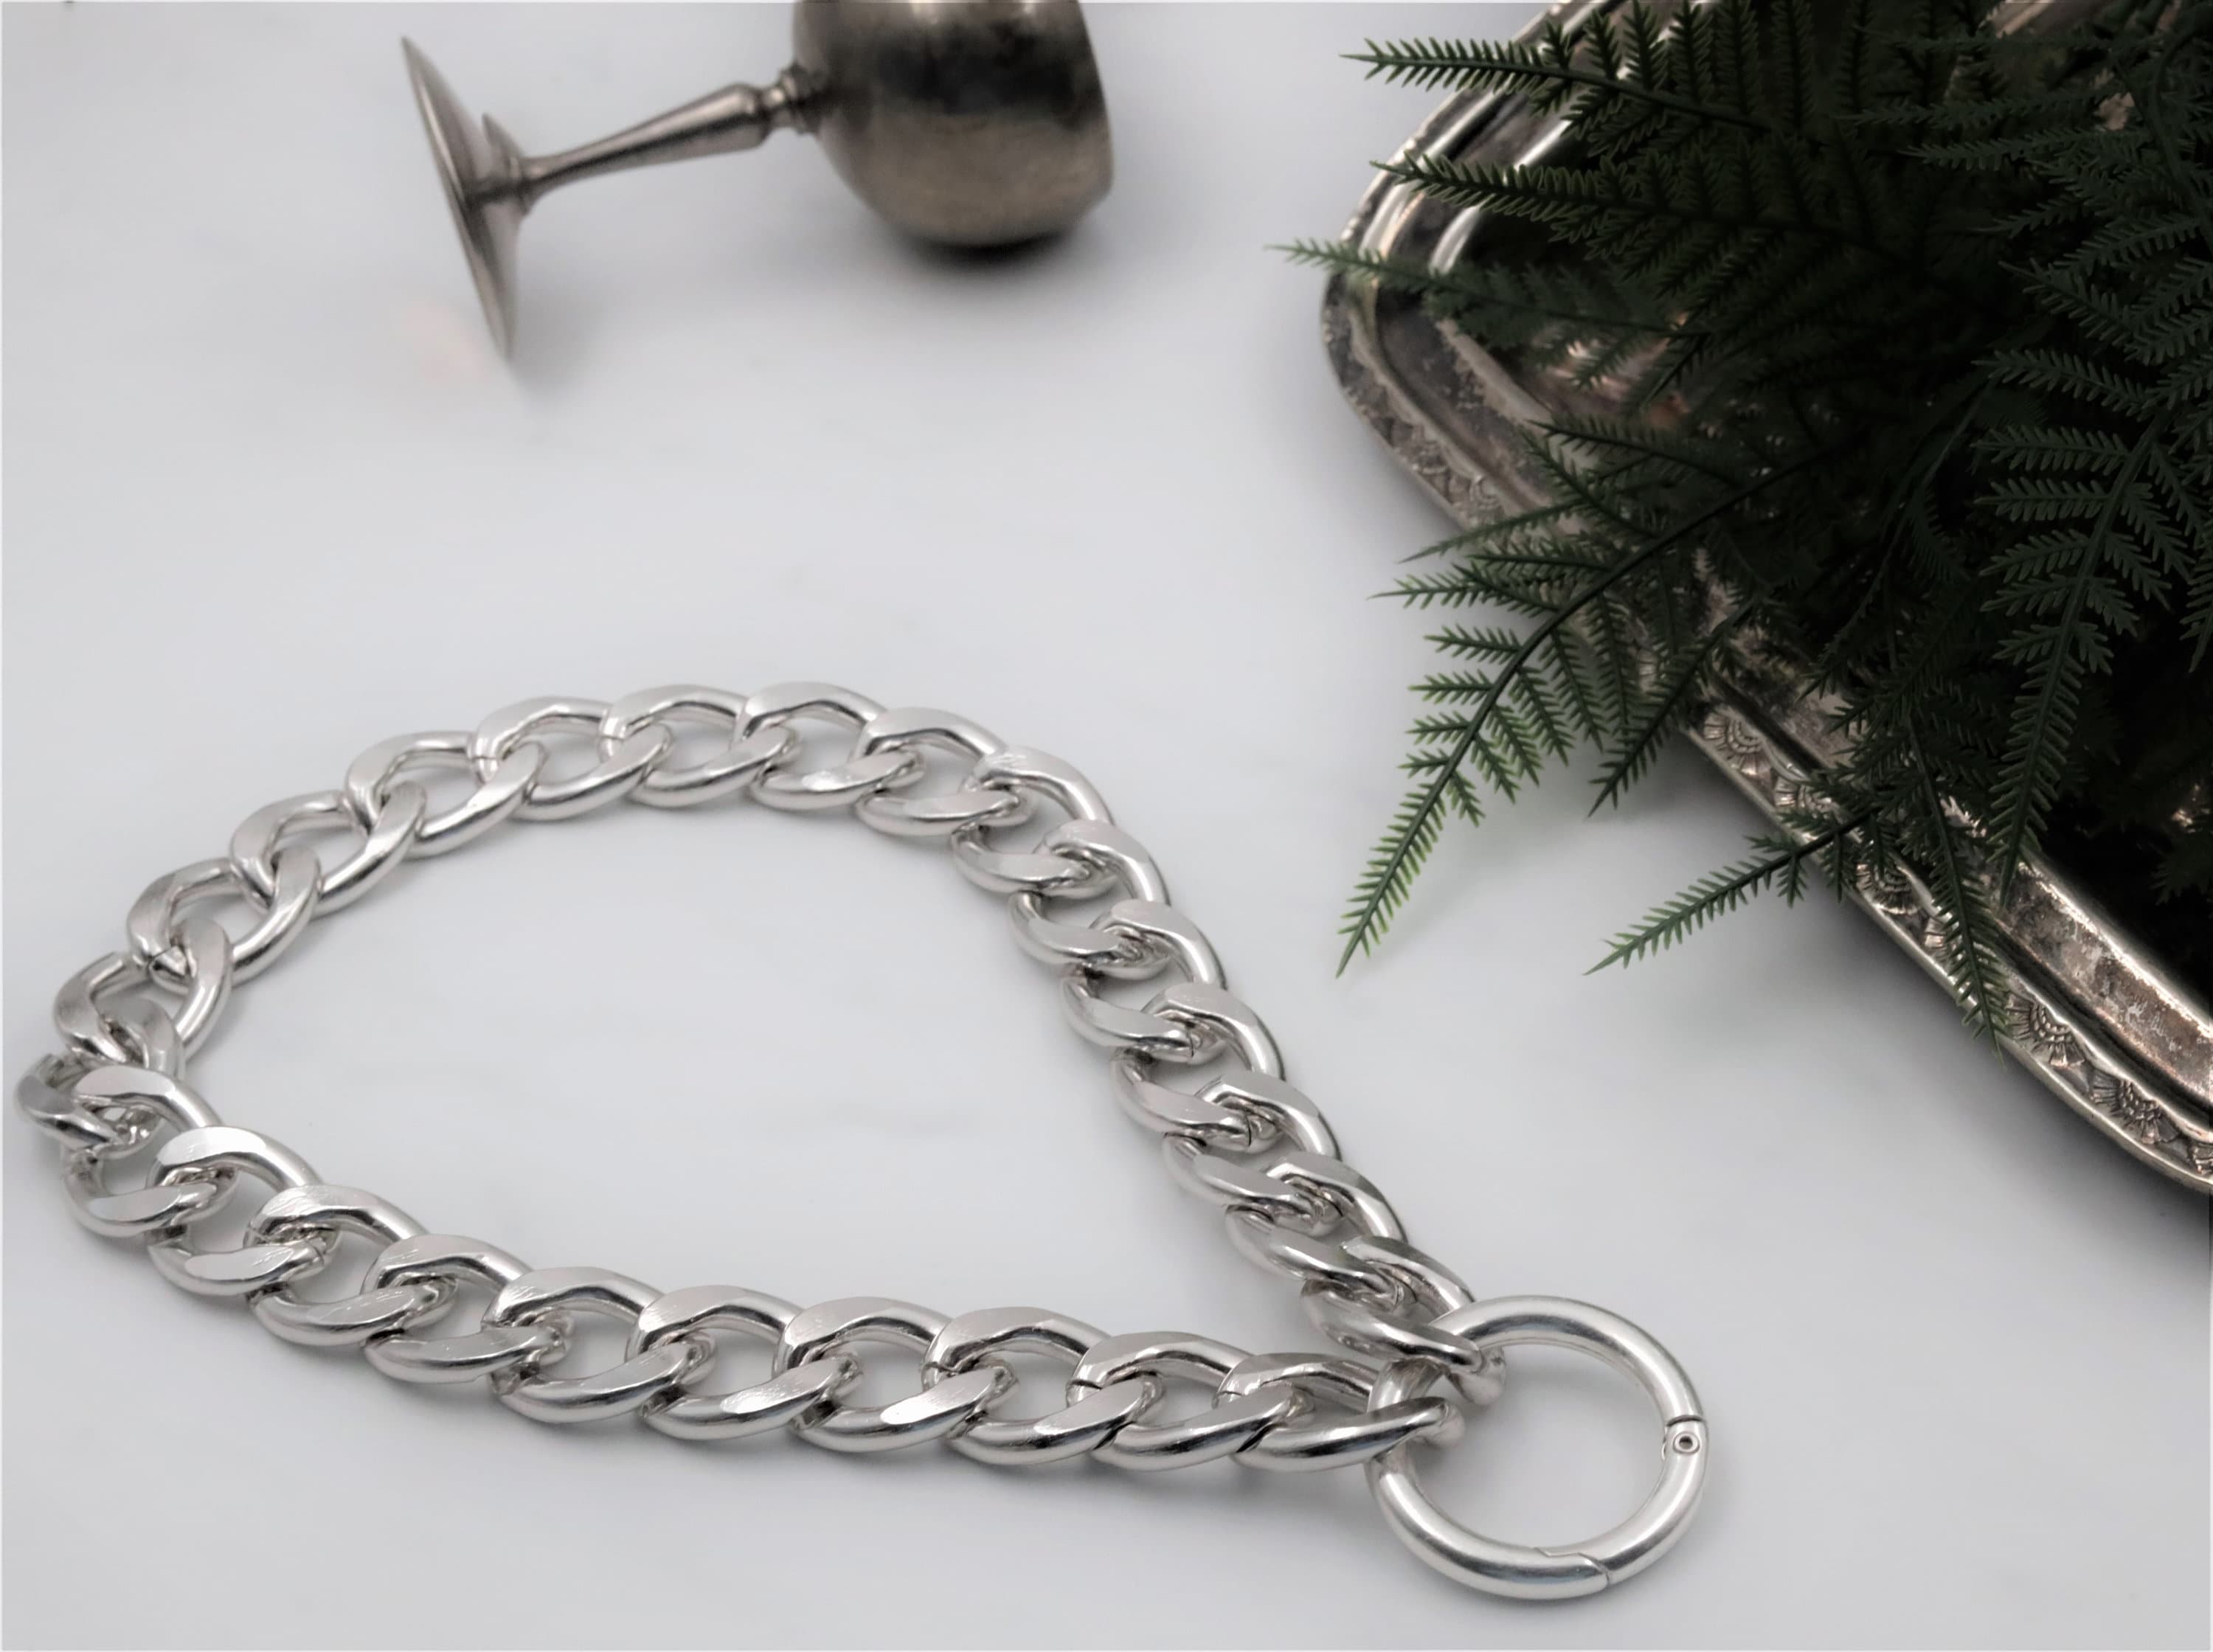 Buy Ring & Chain Detail Sexy Choker - For ONLY $35.99 - Worldwide Shipping